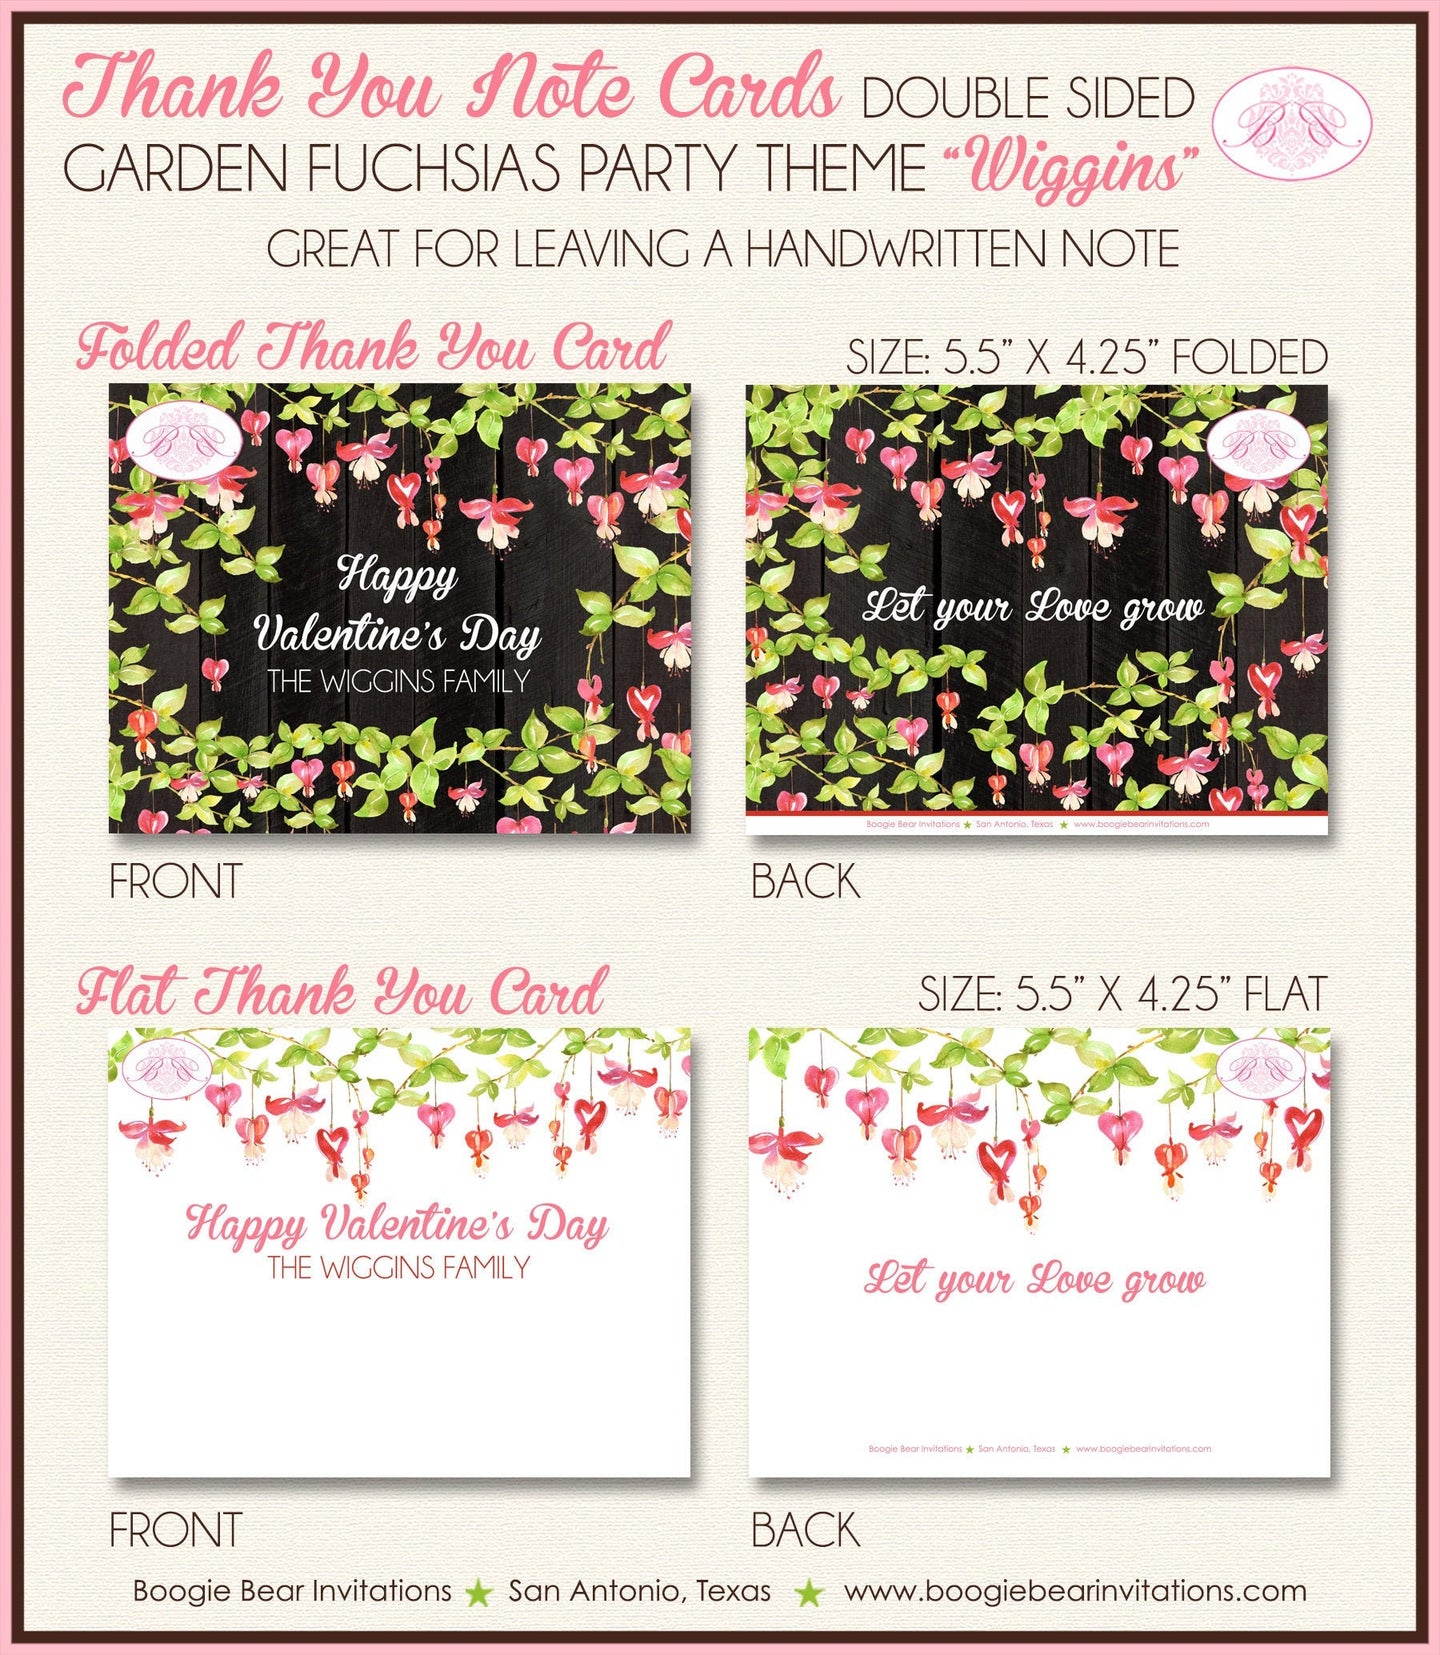 Garden Fuchsias Valentine's Party Thank You Card Note Party Day Love Spring Grow Pink Red Girl Boogie Bear Invitations Wiggins Theme Printed